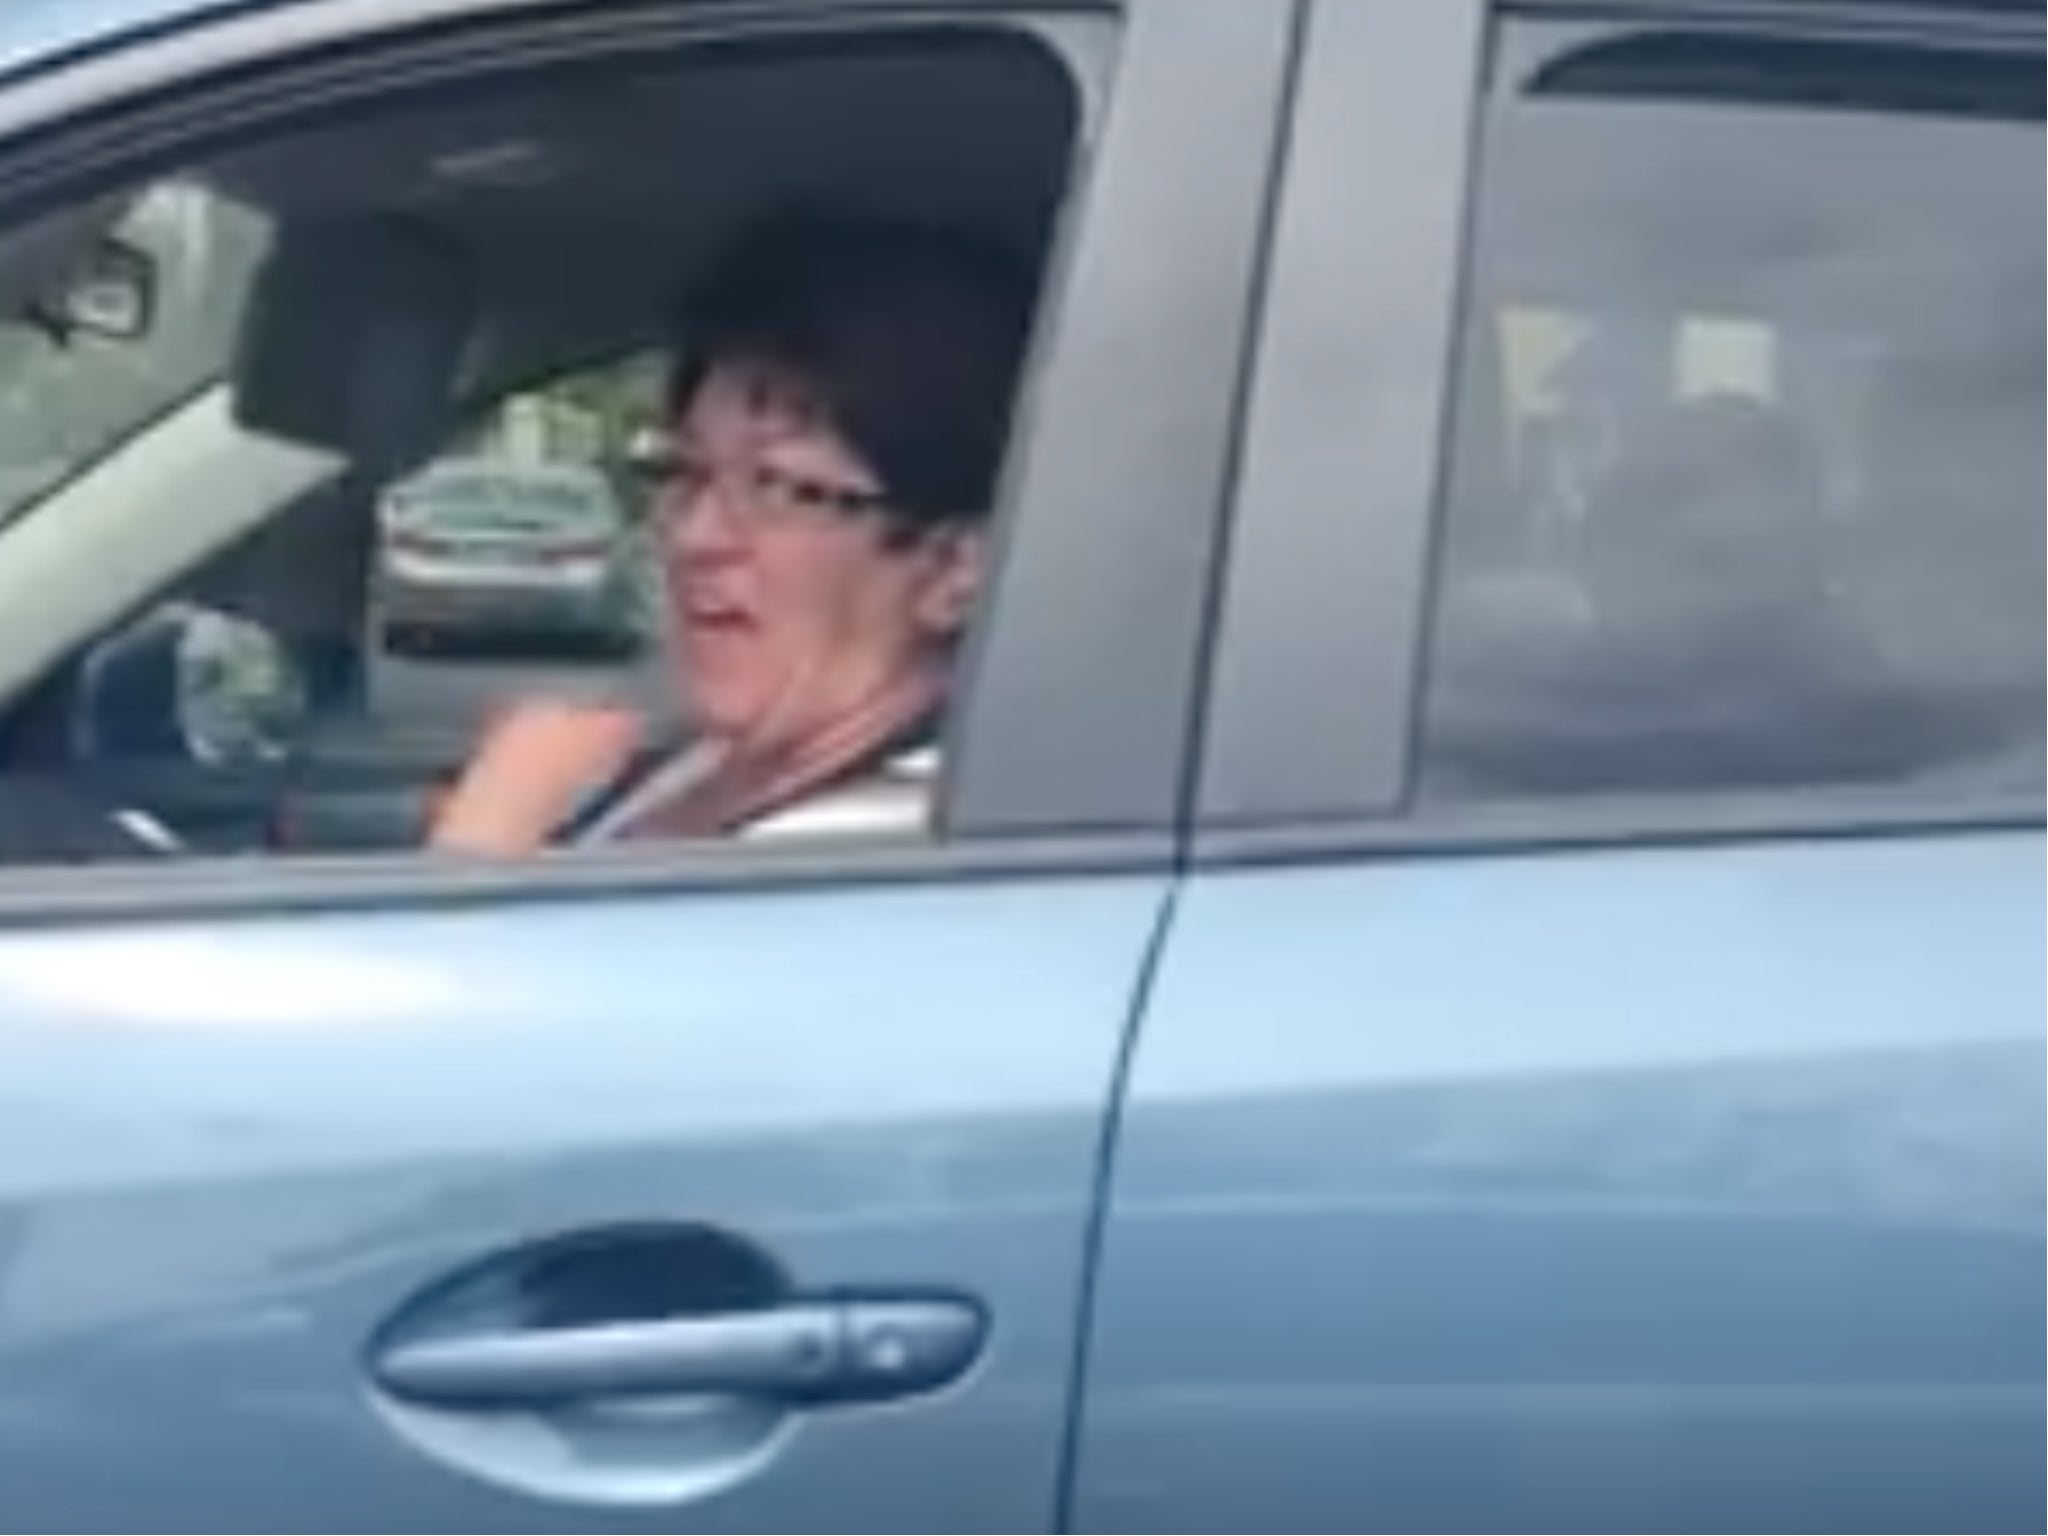 Woman S Racist Road Rage Attack On Korean American Veteran Caught On Camera The Independent